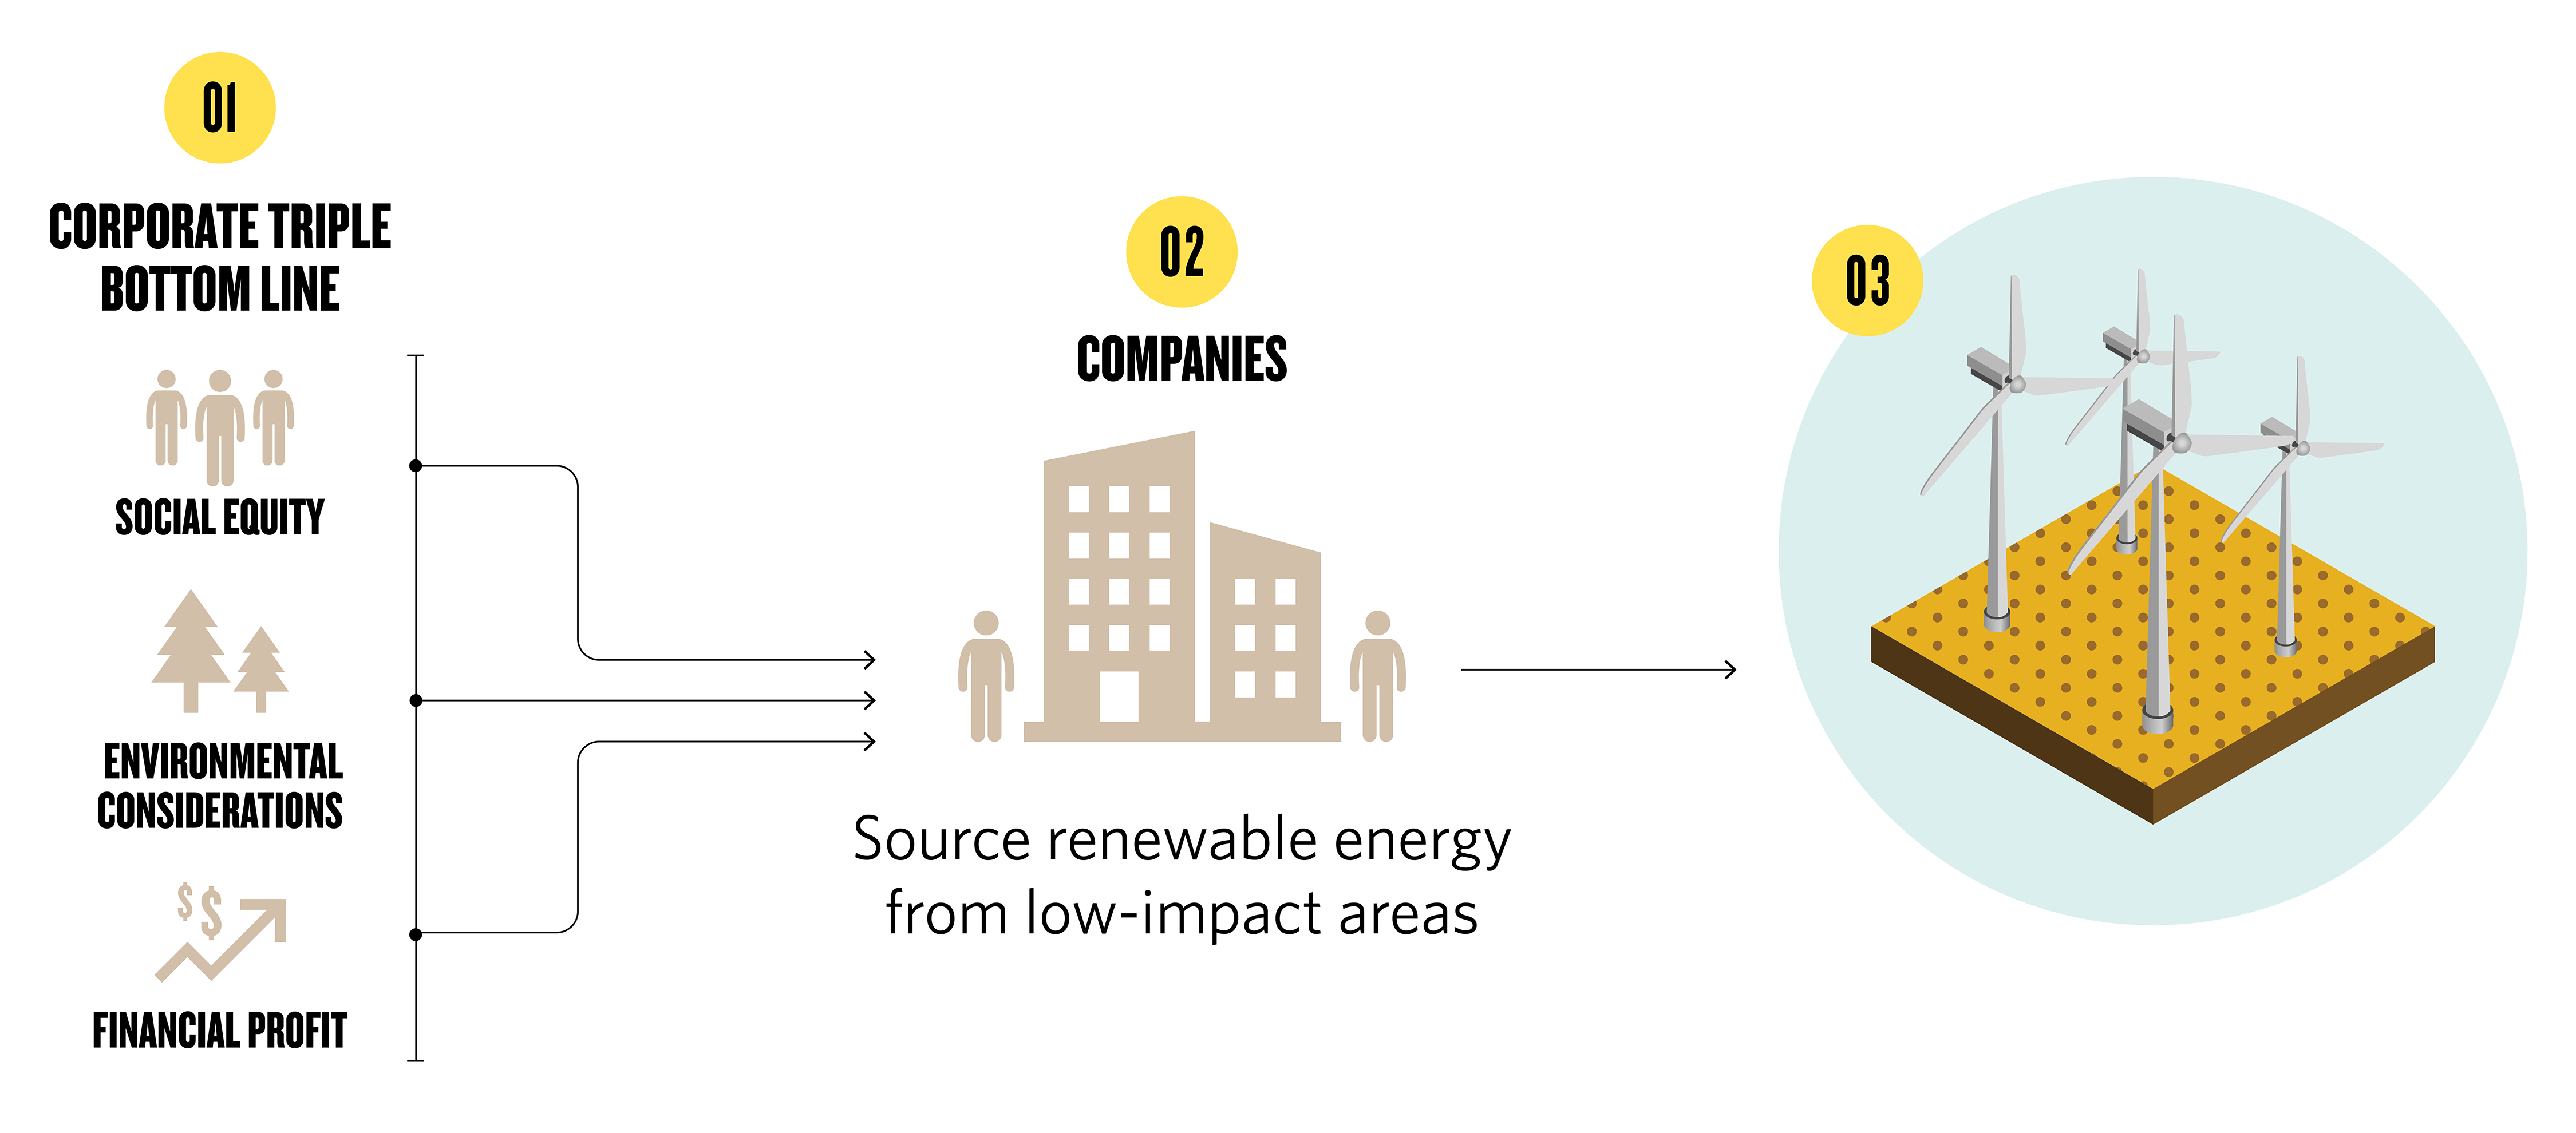 a flowchart that shows corporate triple bottom line (social equity, environmental considerations, and financial profit) contributing to companies sourcing renewable energy from low-impact areas